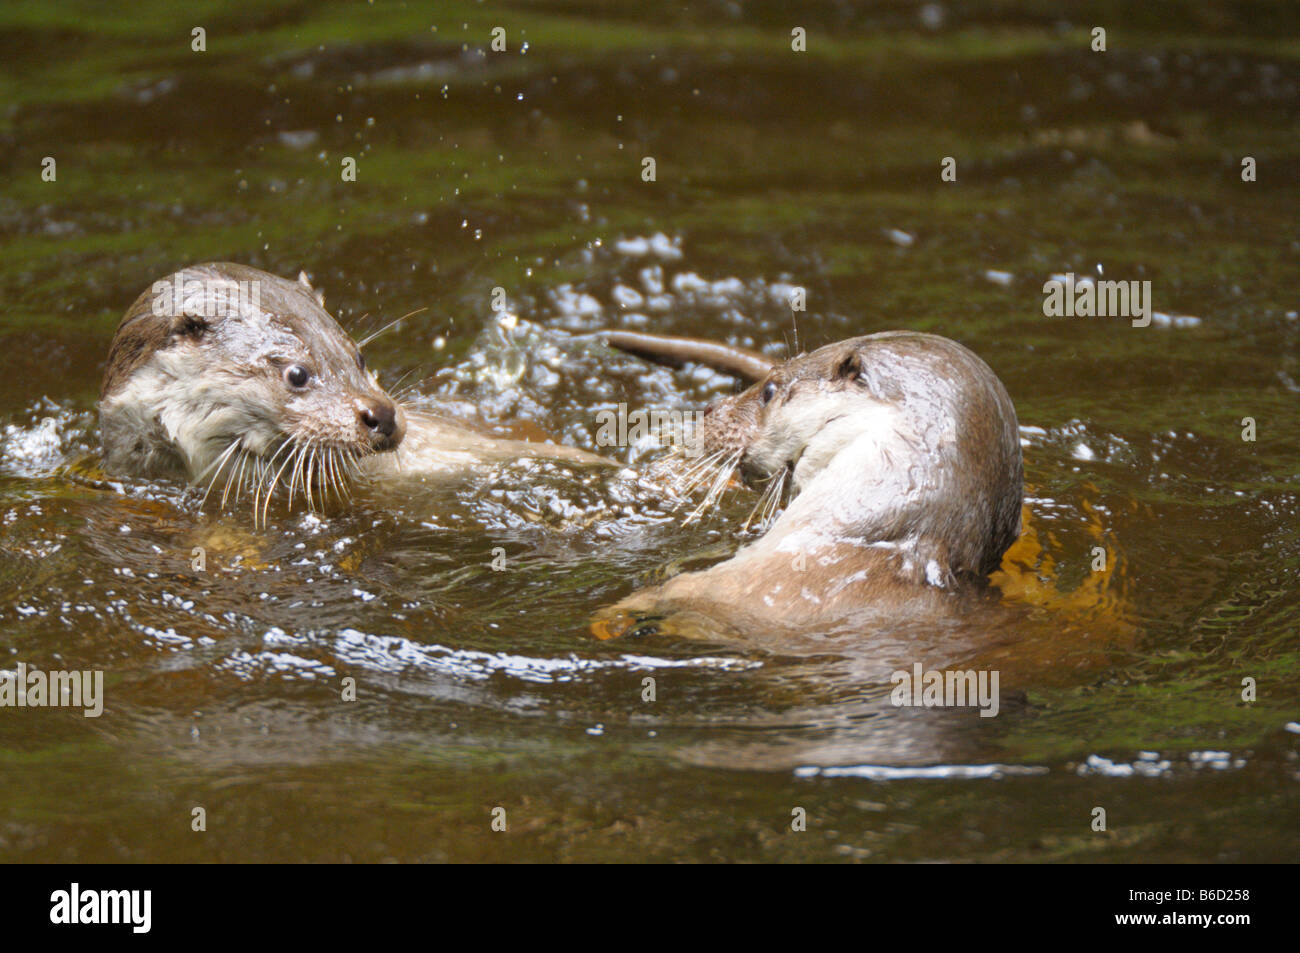 European otters (Lutra lutra) playing in water Stock Photo